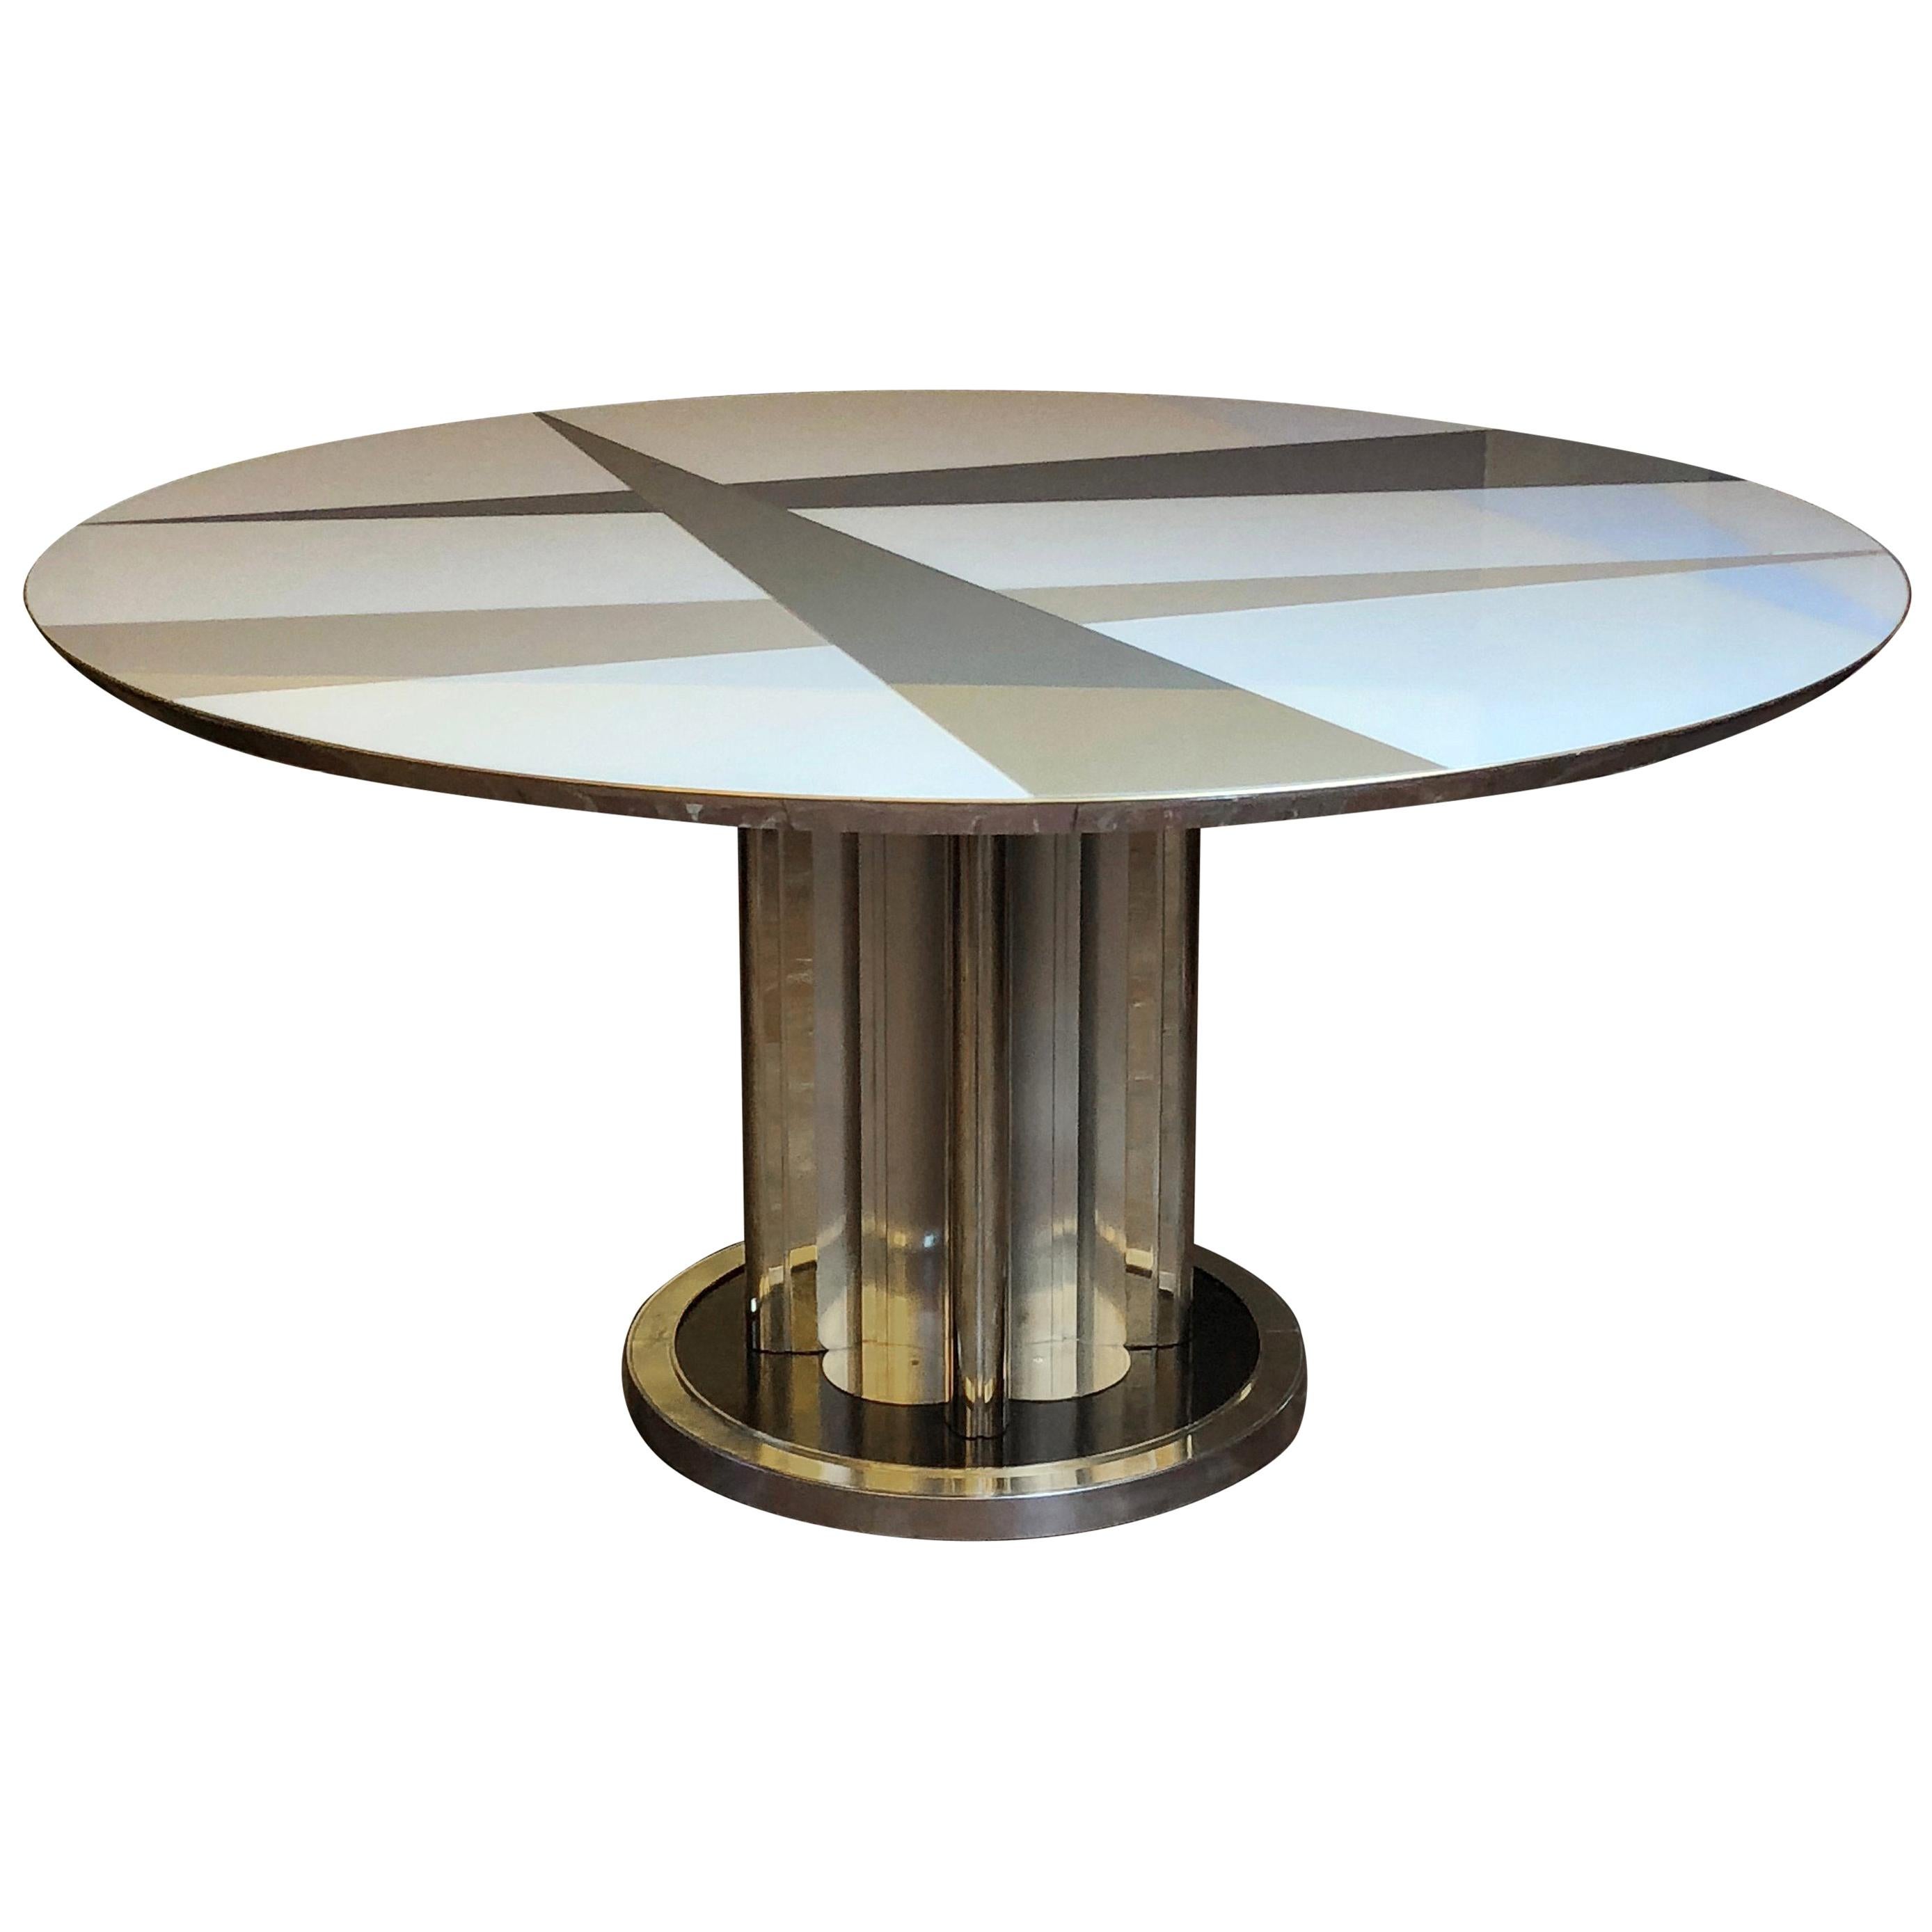 Space Age Round Table, Murano Glass Top and Aluminum, Brass and Wood Pedestal